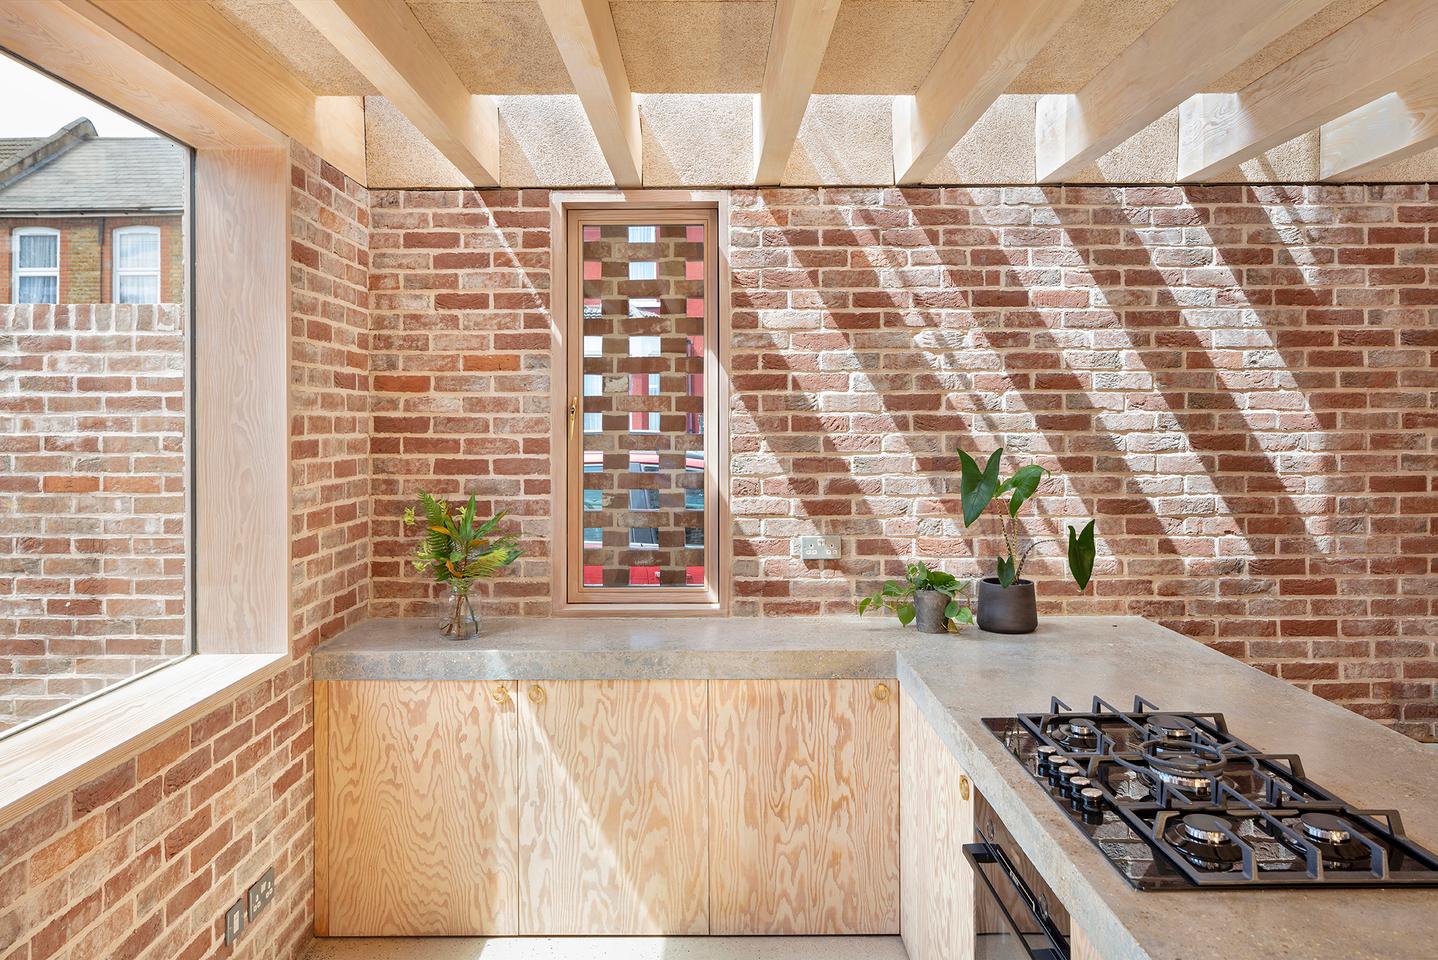 Leyton House has a compact interior that's light-filled and leaves the brickwork exposed